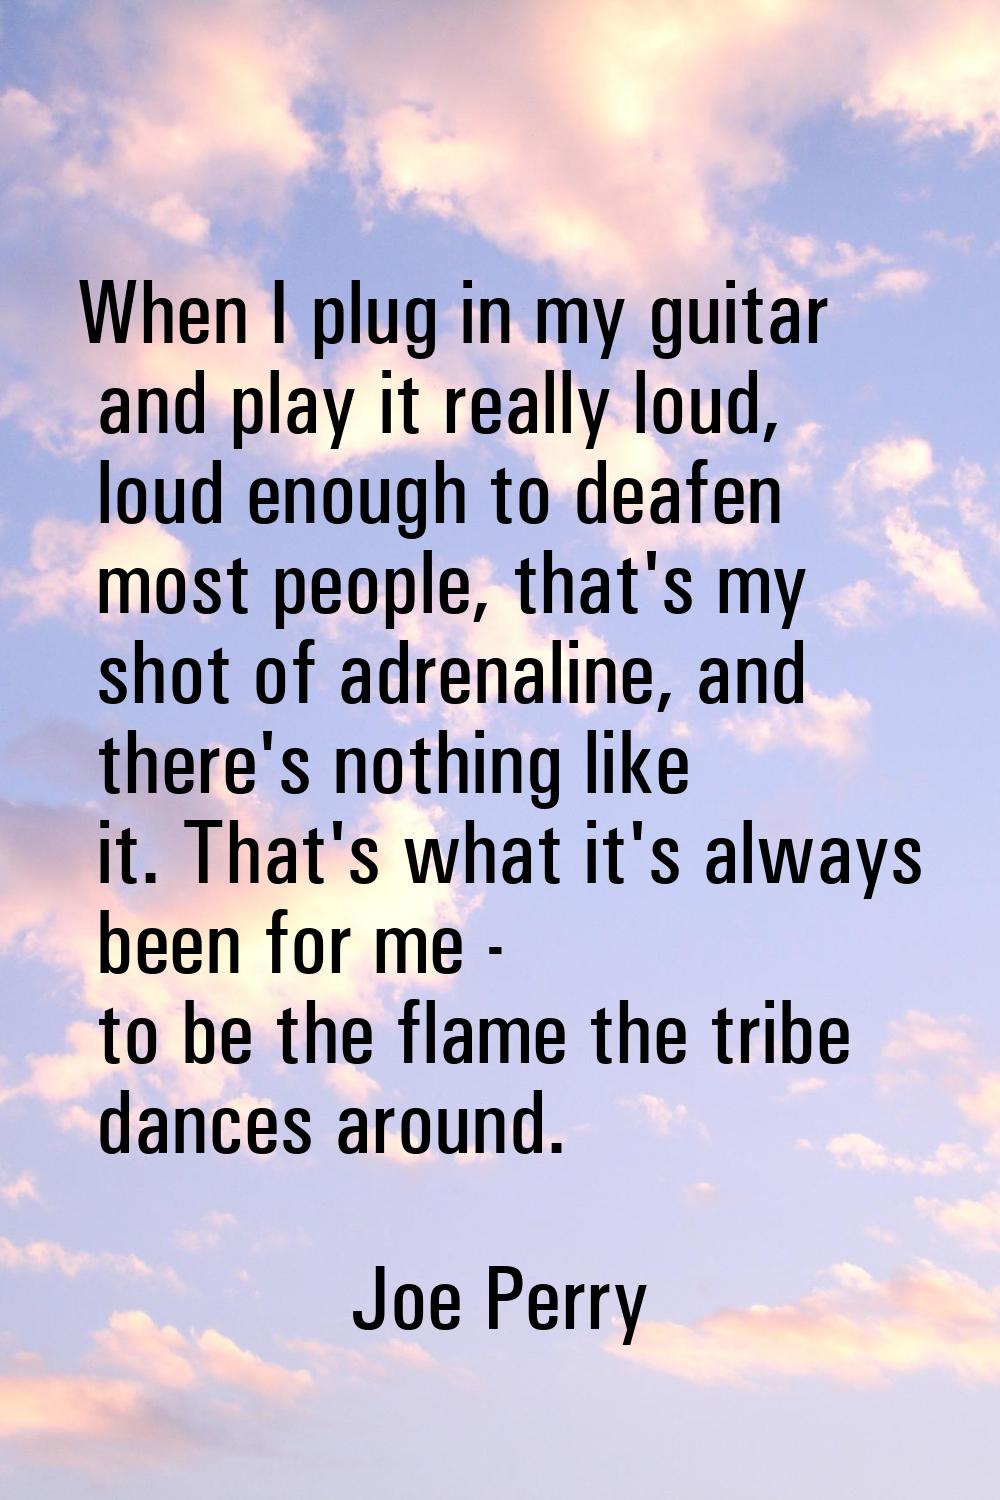 When I plug in my guitar and play it really loud, loud enough to deafen most people, that's my shot